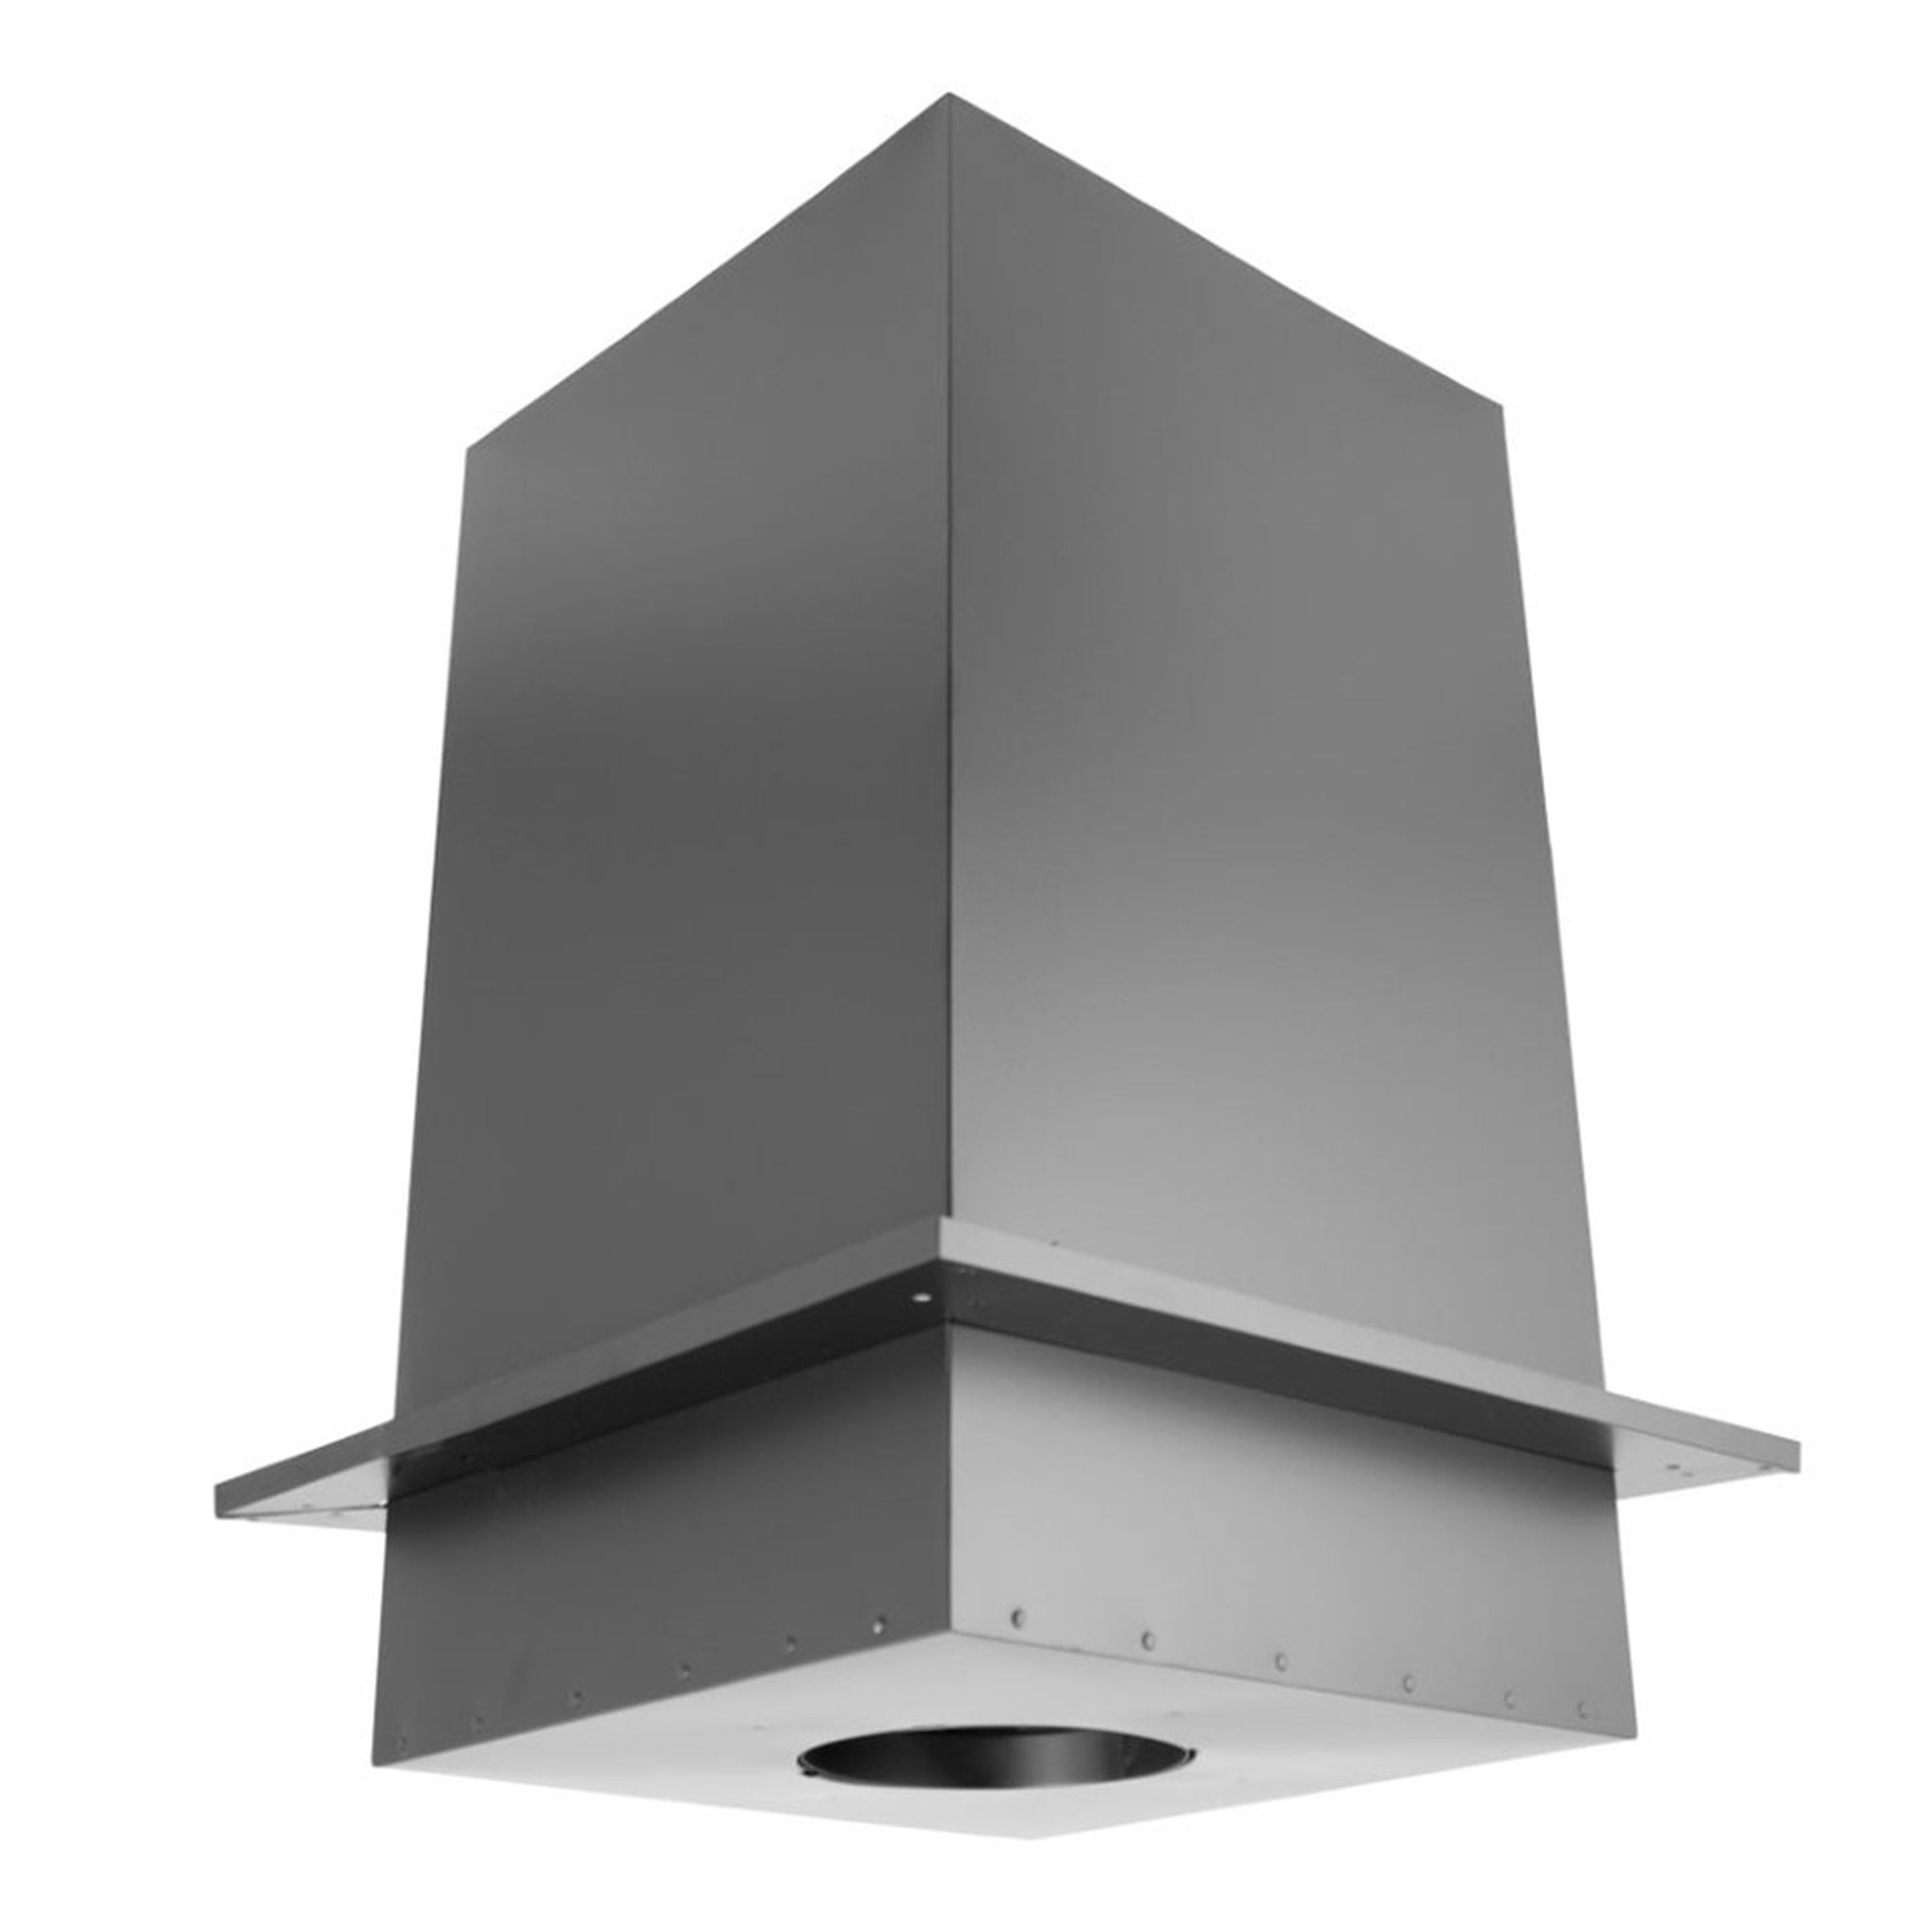 M & G DuraVent 6DT-48SSCF 6 inch x 48 inch DuraTech Factory-Built Chimney Length 430-alloy Inner Line, Size: 6 x 48, Silver